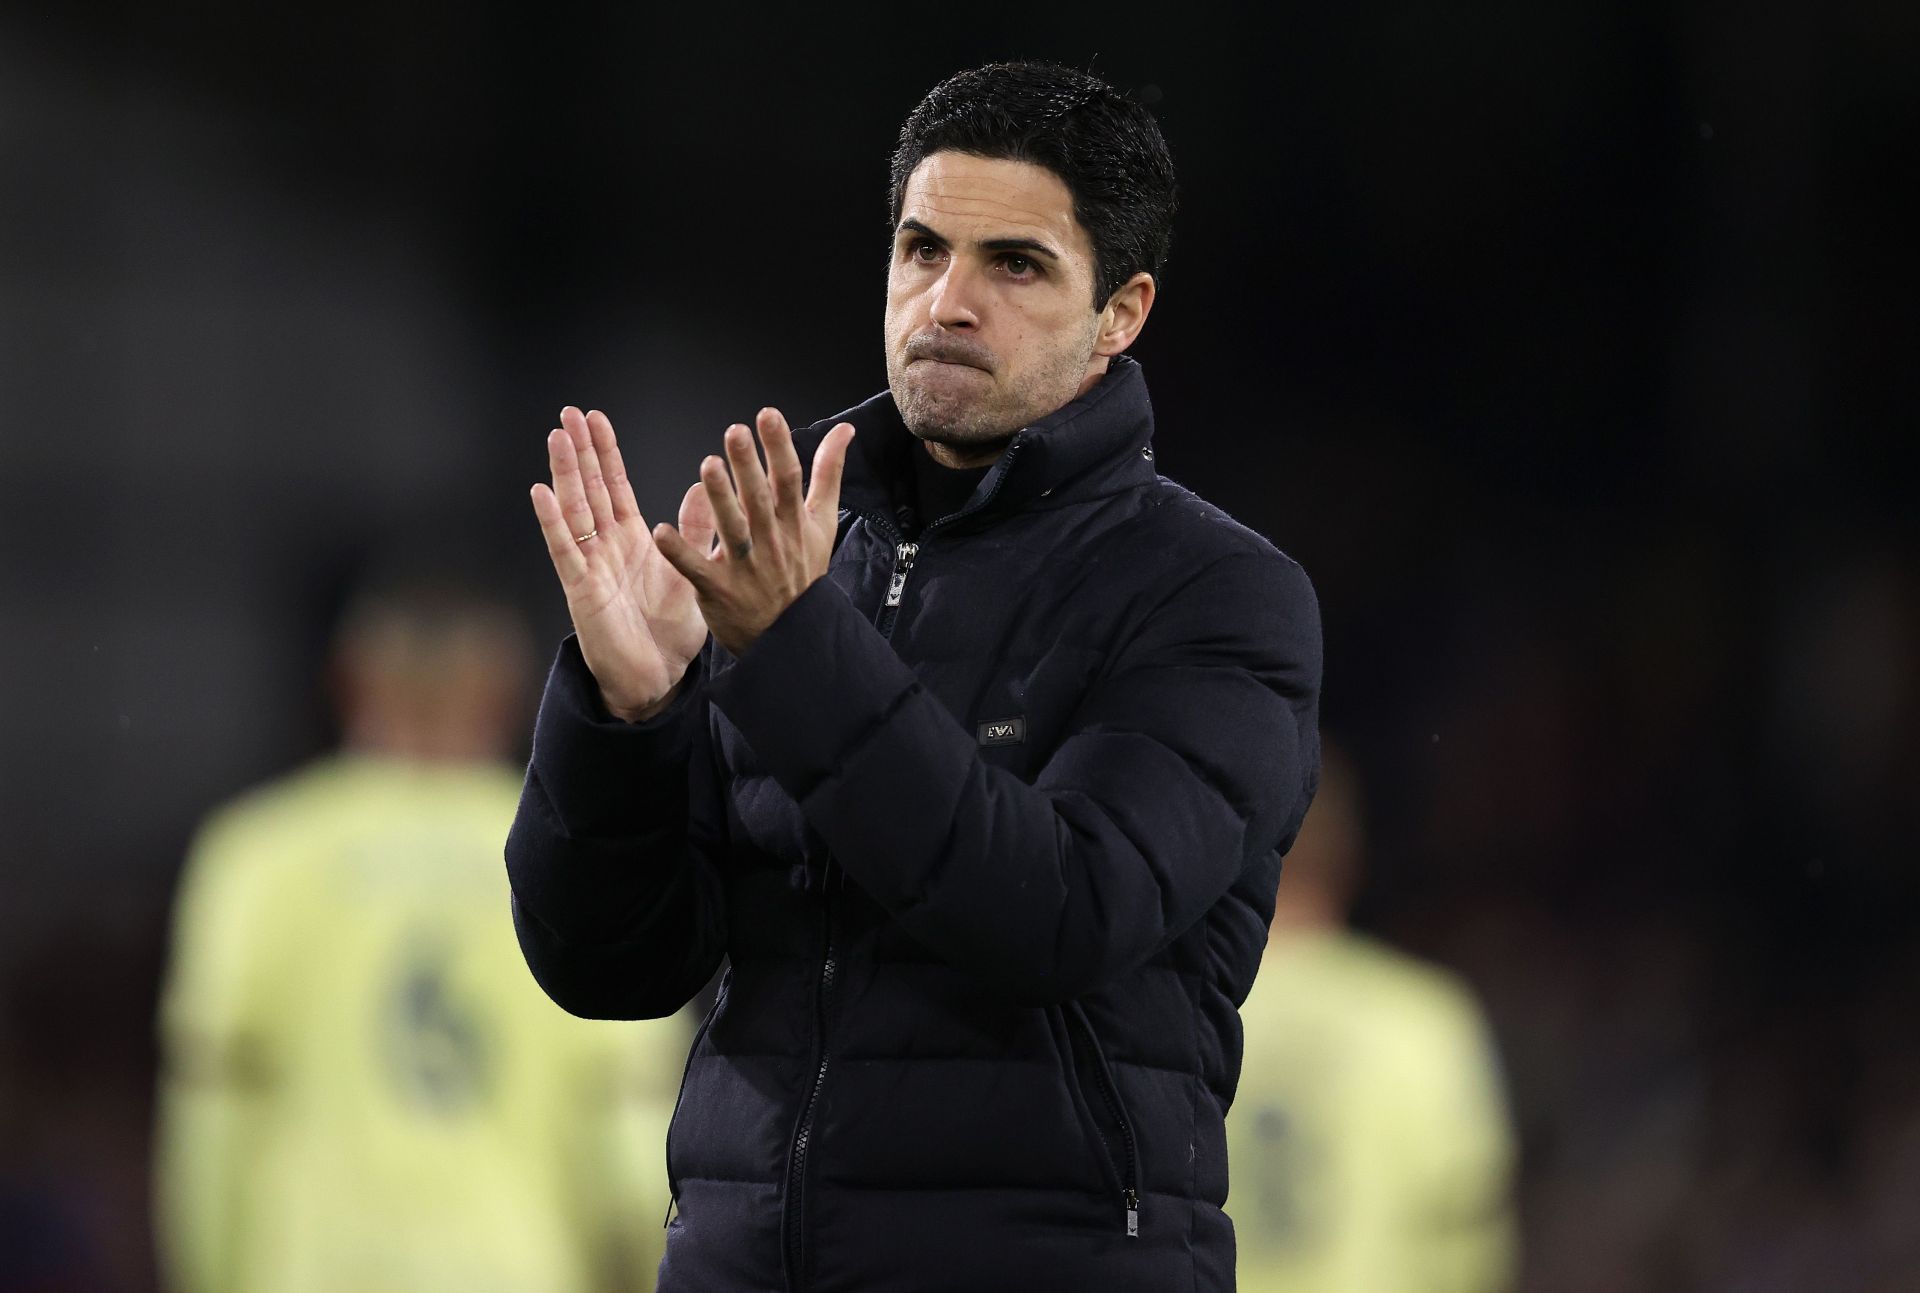 Mikel Arteta has been in charge of the Gunners since December 2019